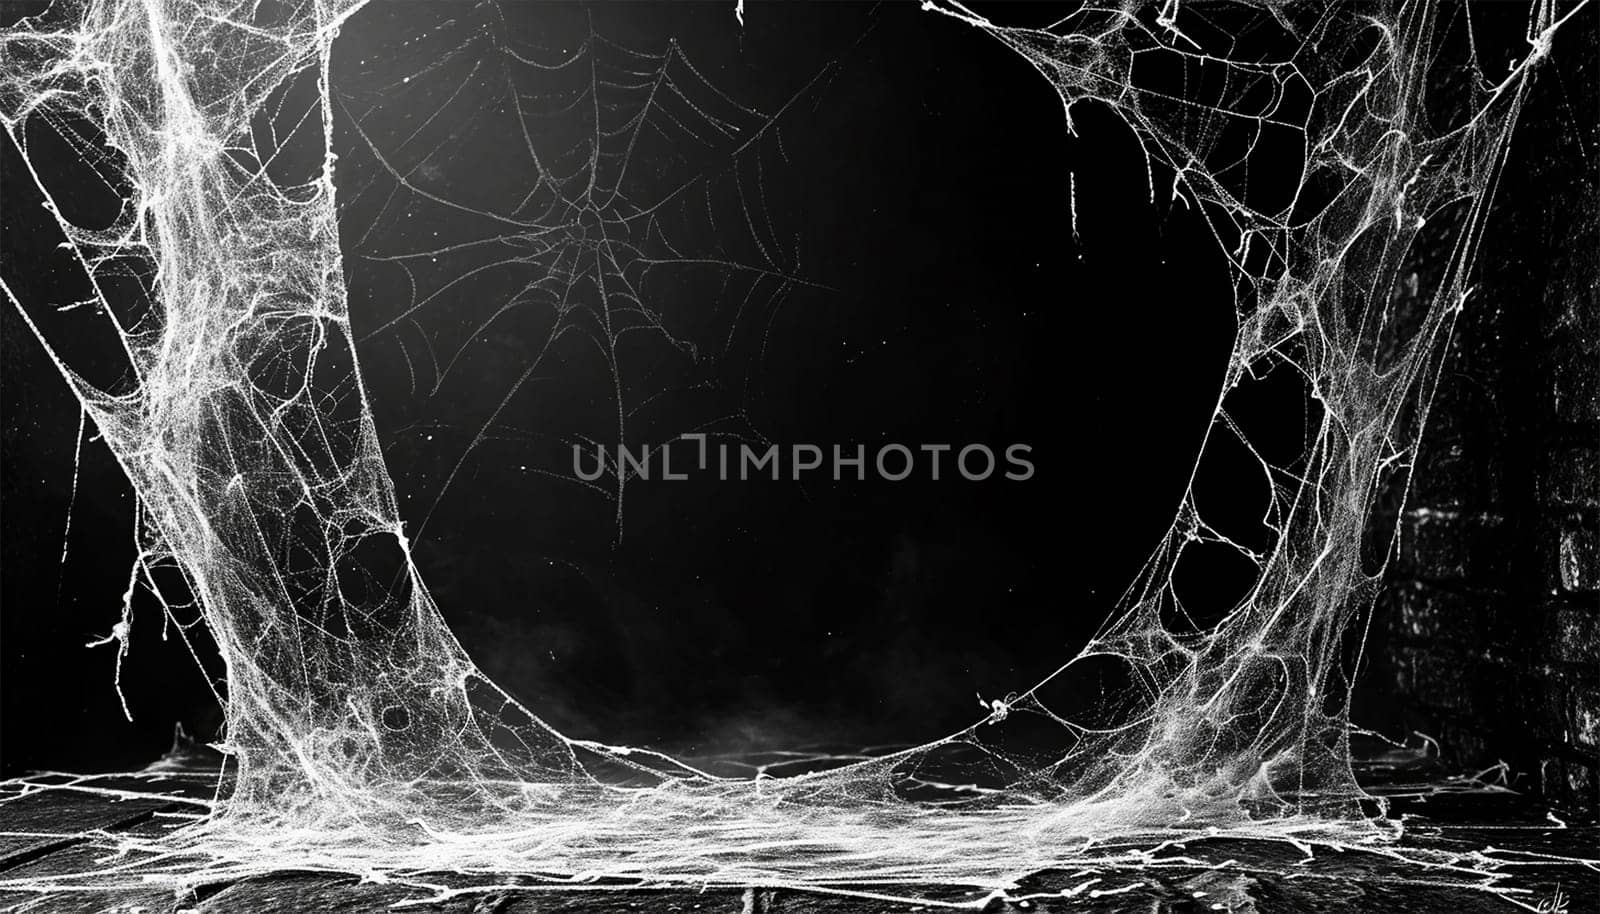 Spiderweb on black background. Scary spooky Cobweb. Isolated on black transparent background. Spiderweb for halloween, spooky, scary, horror decor Abstract horror background design by Annebel146